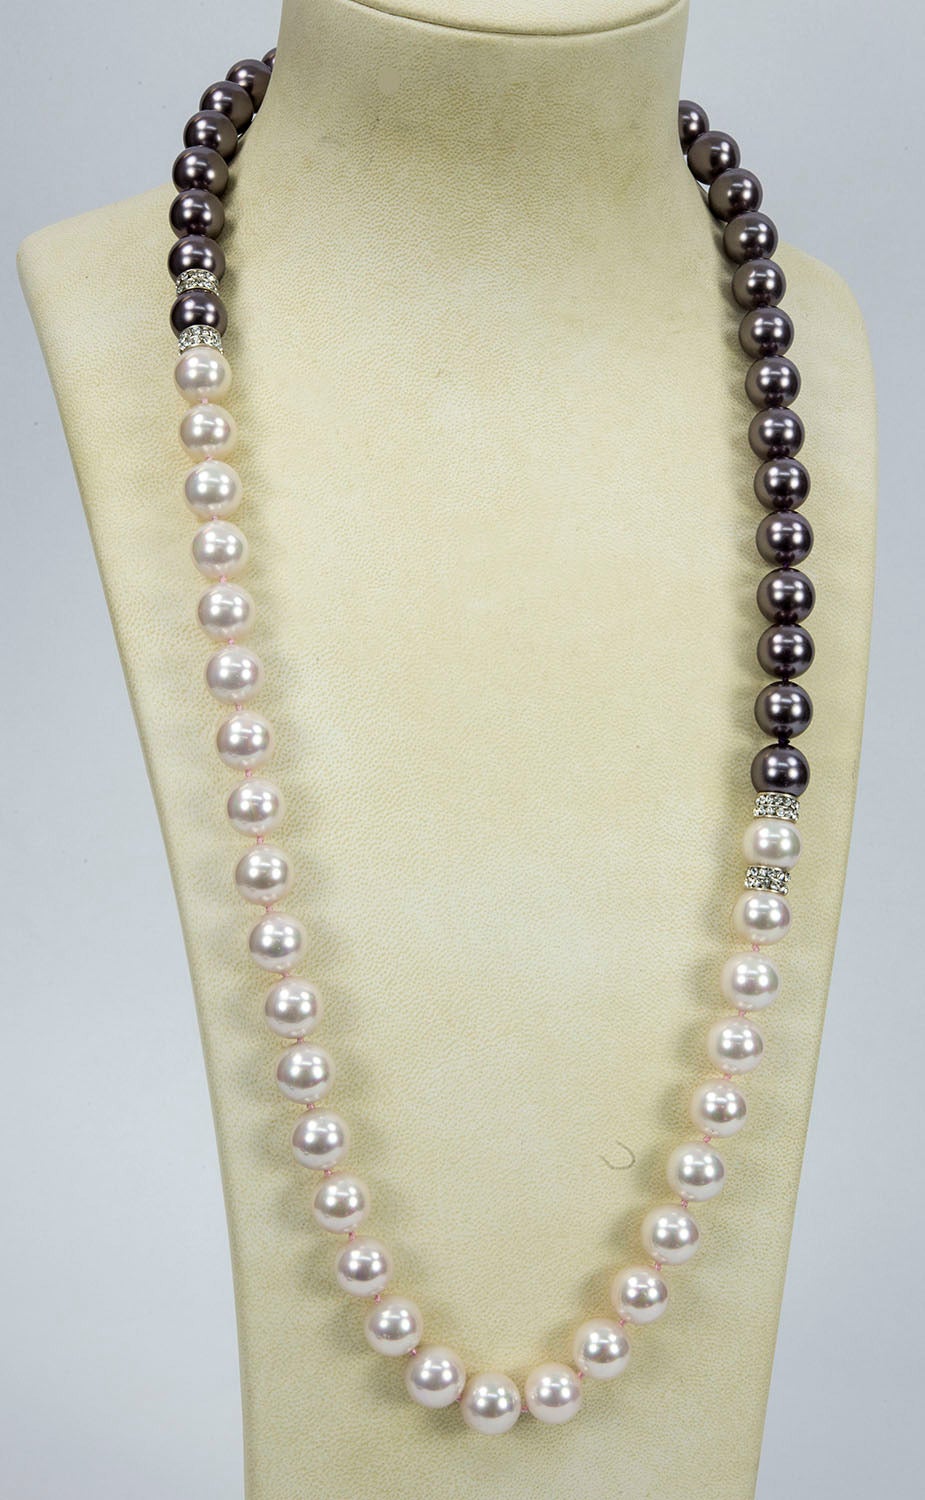 Striking lustrous 14mm Black and White Pearl Runway Necklace, enhanced with CZ encrusted rondelles; hand knotted with matching color silk threads, Necklace measures approx. 32” long. Go anywhere in style with this Chic and Timeless strand of Pearls!